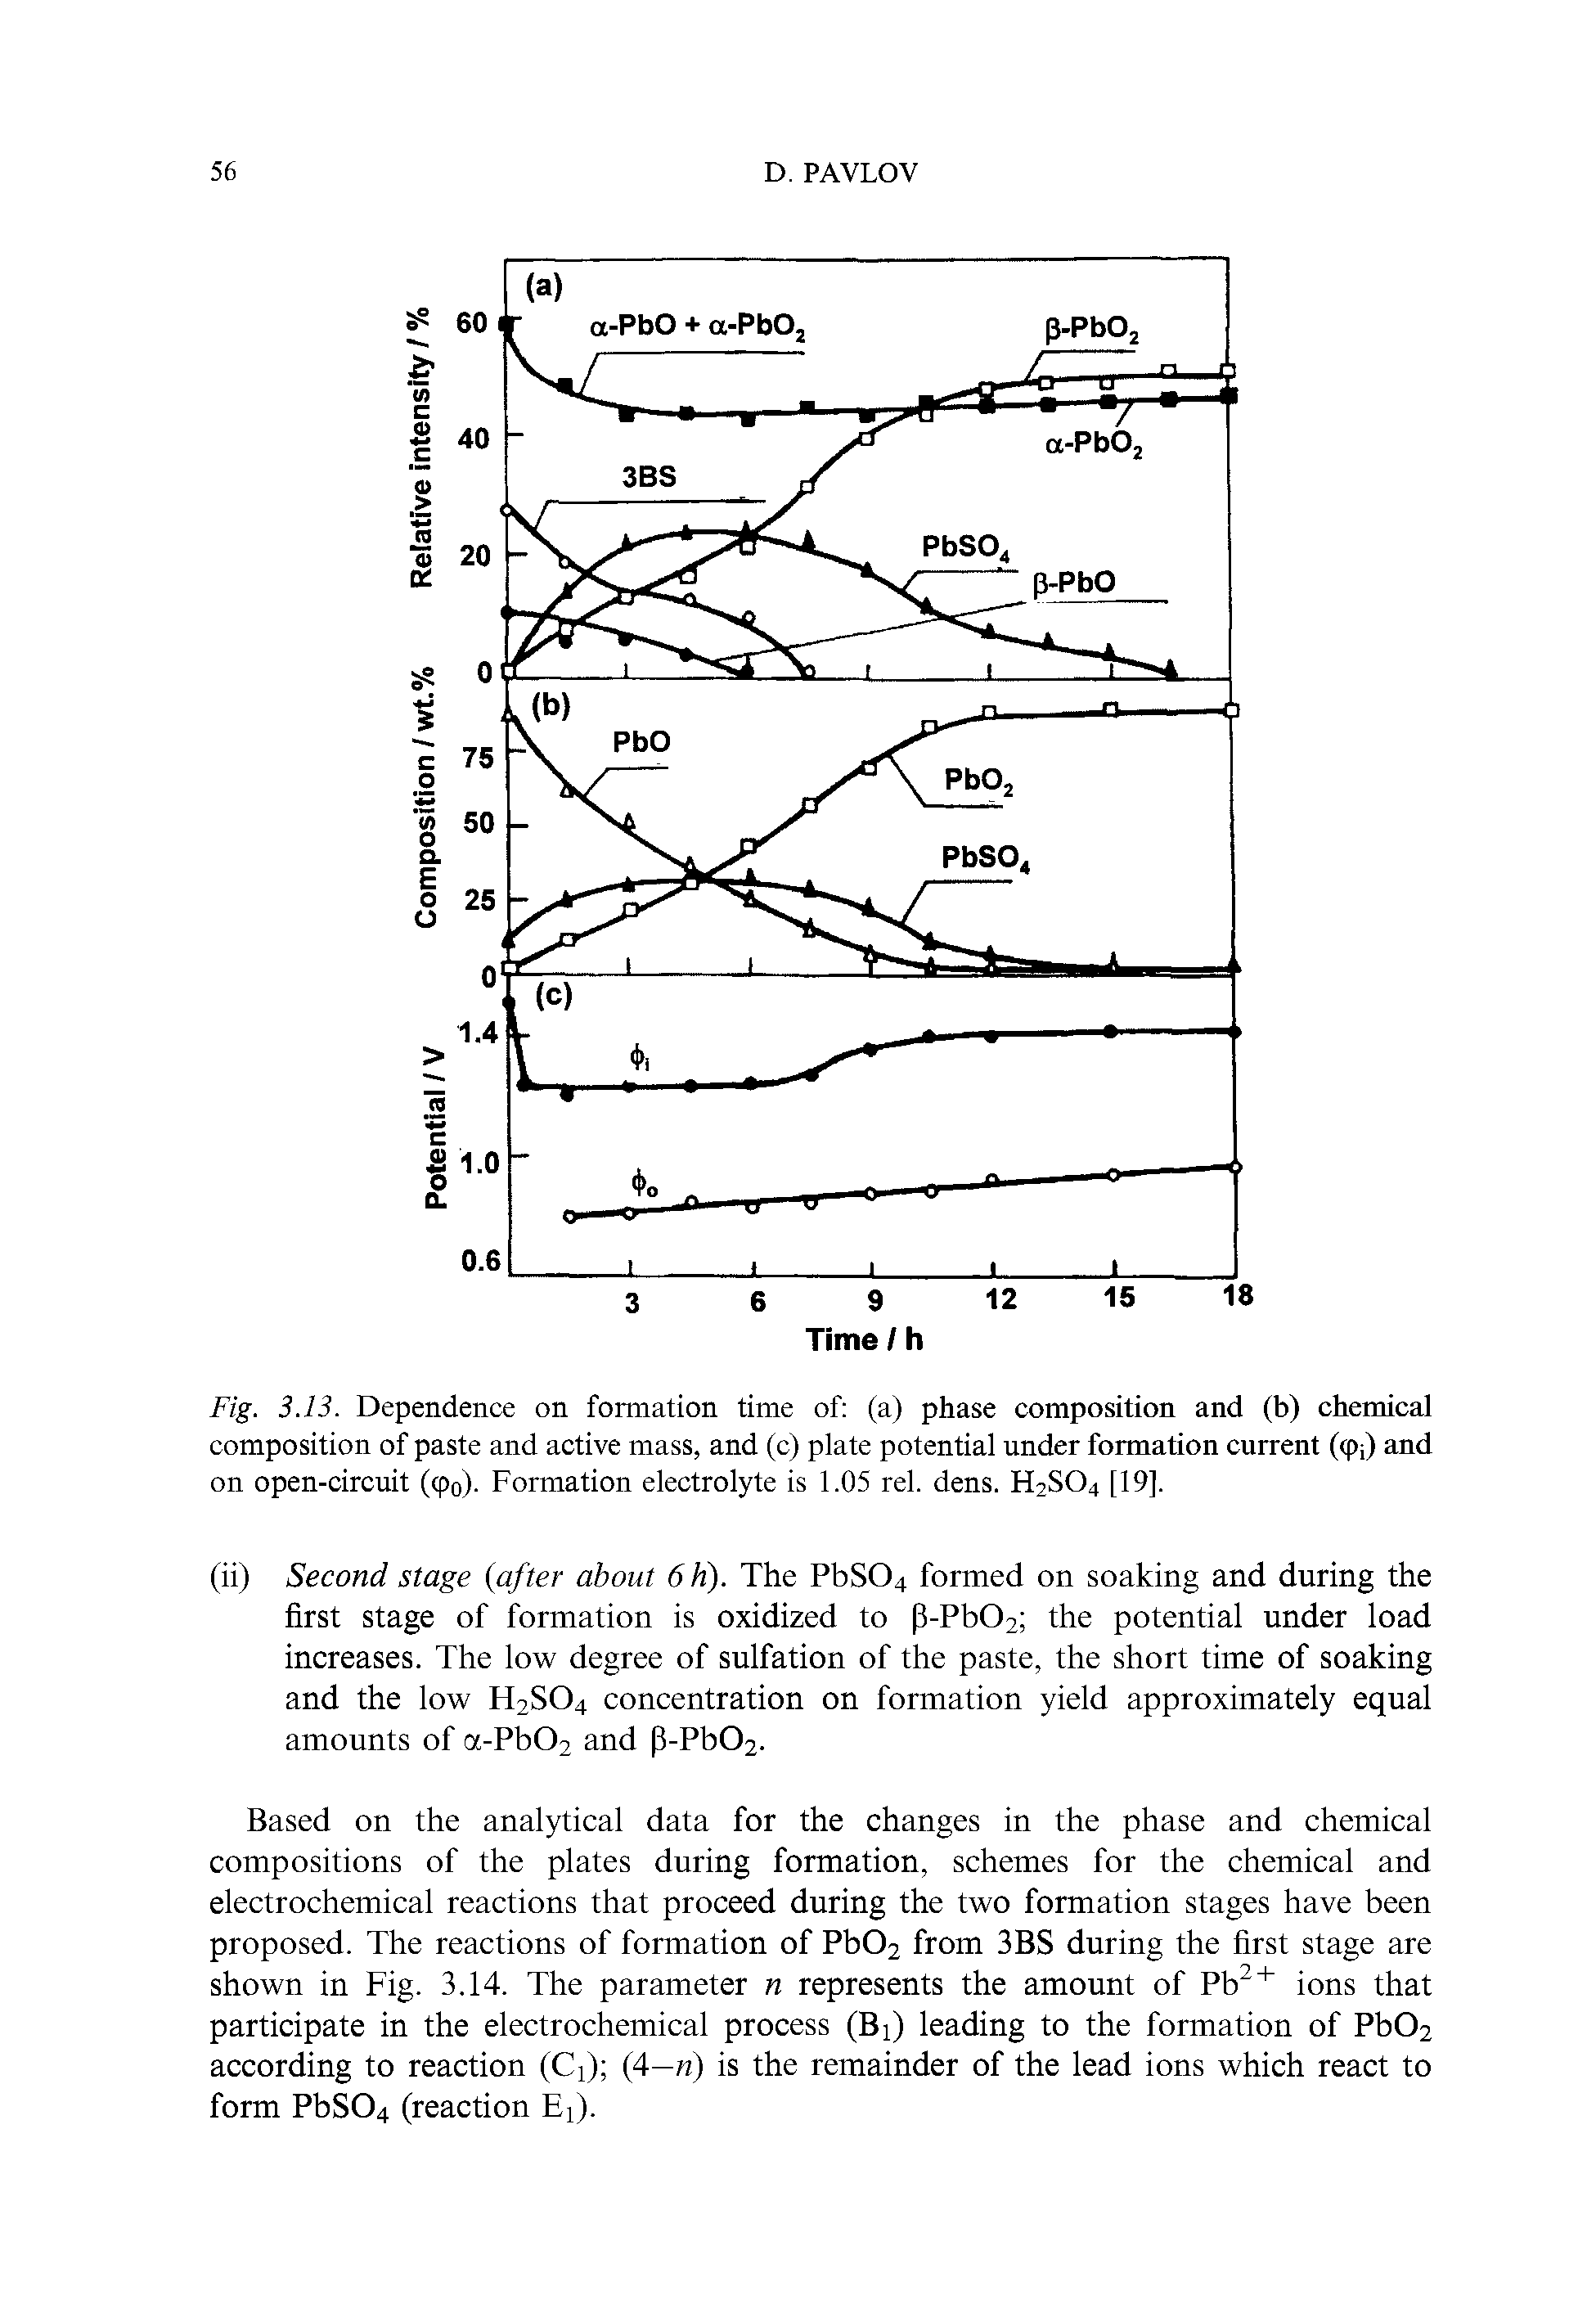 Fig. 3.13. Dependence on formation time of (a) phase composition and (b) chemical composition of paste and active mass, and (c) plate potential under formation current (<Pi) and on open-circuit (cpo). Formation electrolyte is 1.05 rel. dens. H2SO4 [19].